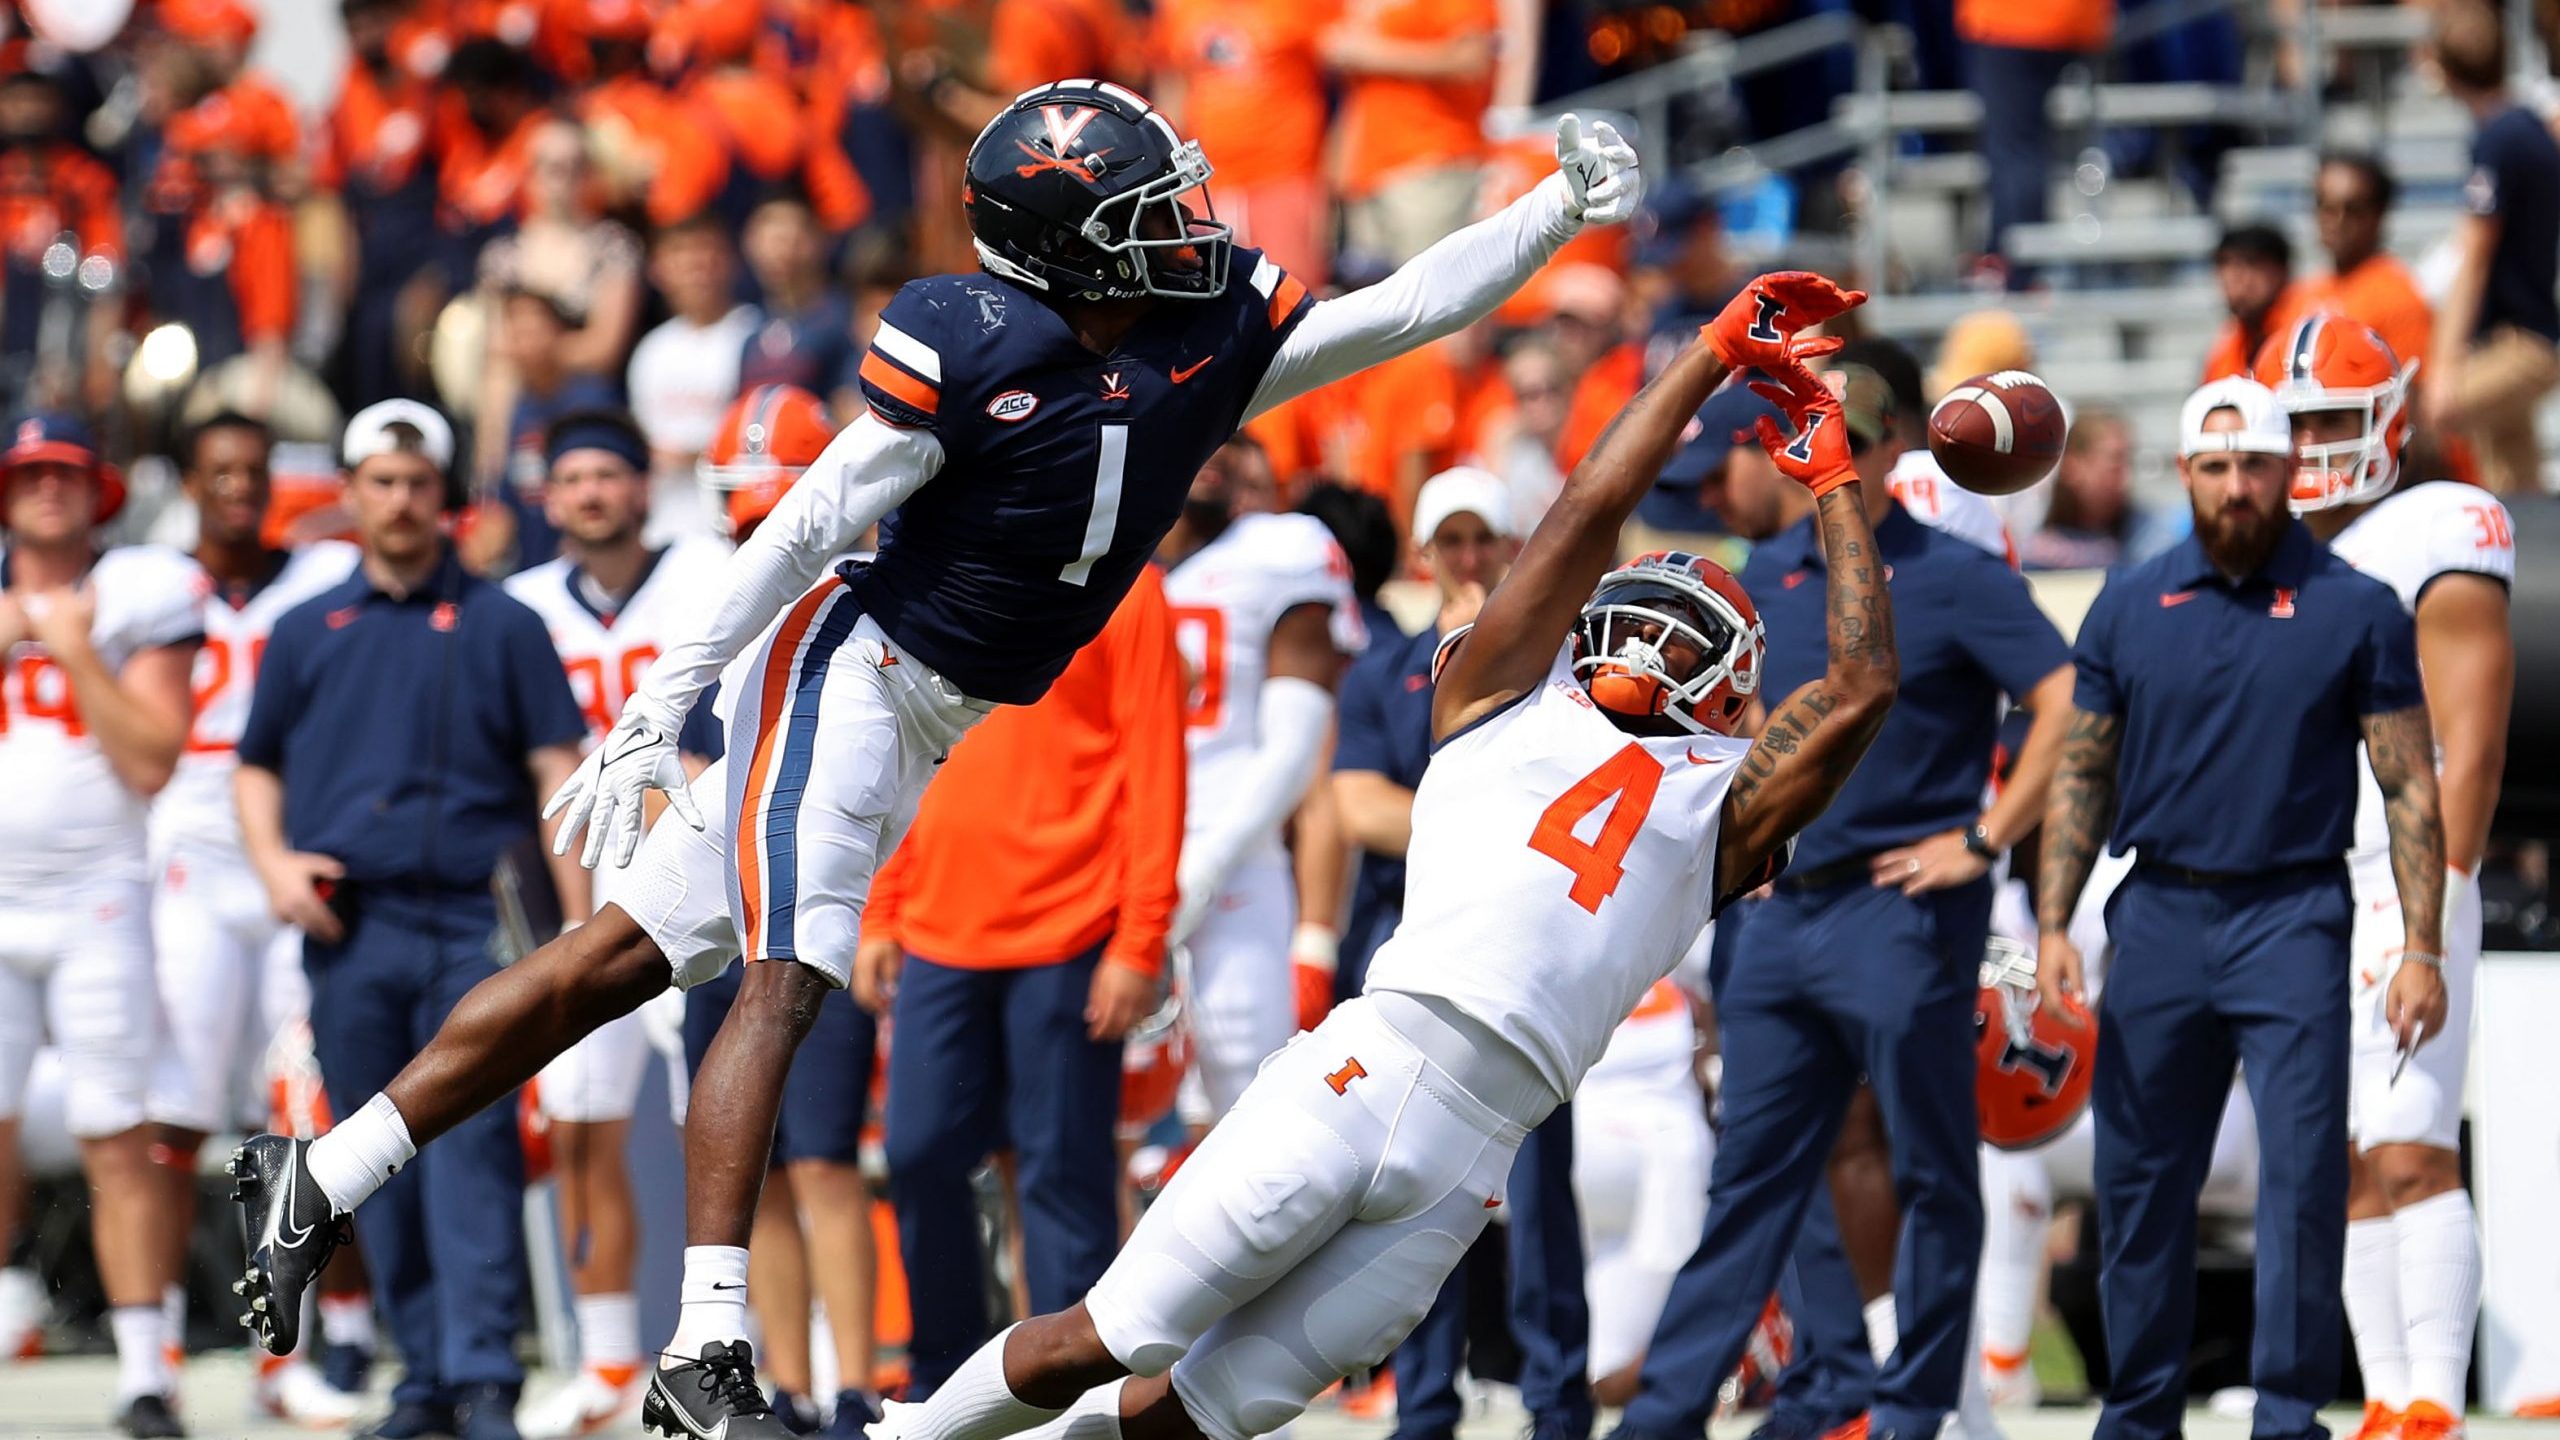 CHARLOTTESVILLE, VA - SEPTEMBER 11: Nick Grant #1 of the Virginia Cavaliers defends a pass intended...